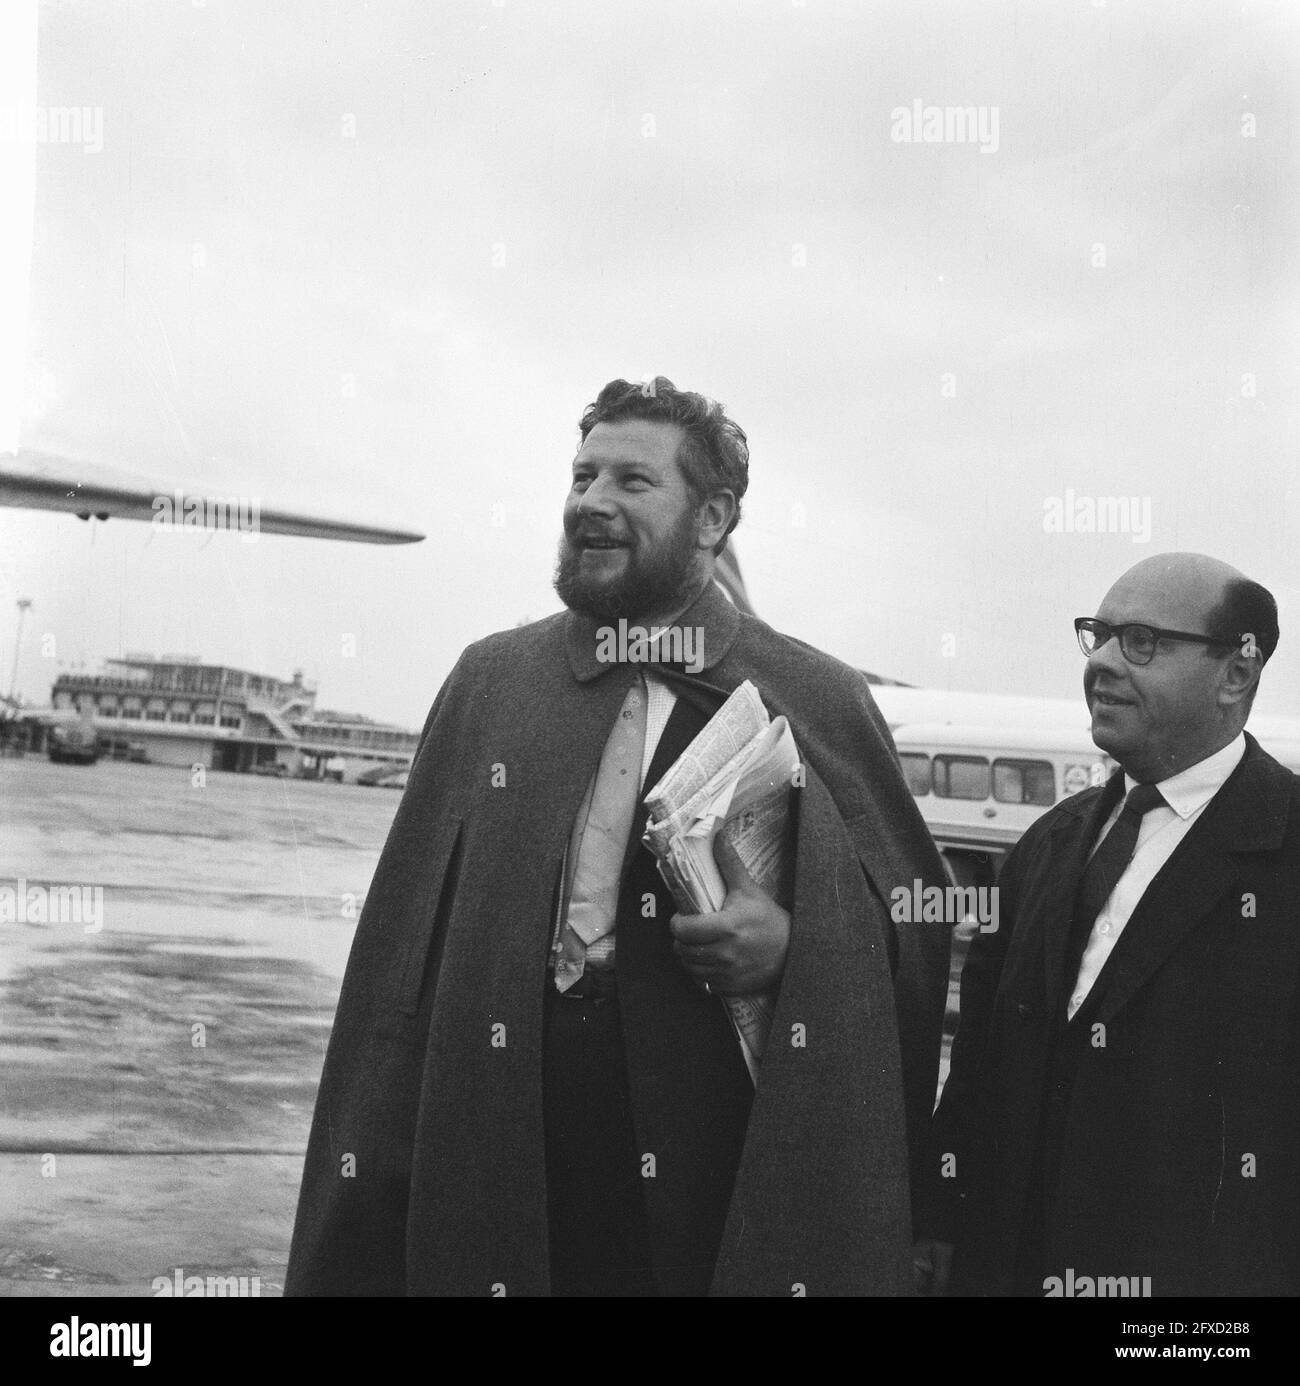 Peter Ustinov, English film director [next to him Simon van Collem], September 24, 1962, film directors, The Netherlands, 20th century press agency photo, news to remember, documentary, historic photography 1945-1990, visual stories, human history of the Twentieth Century, capturing moments in time Stock Photo